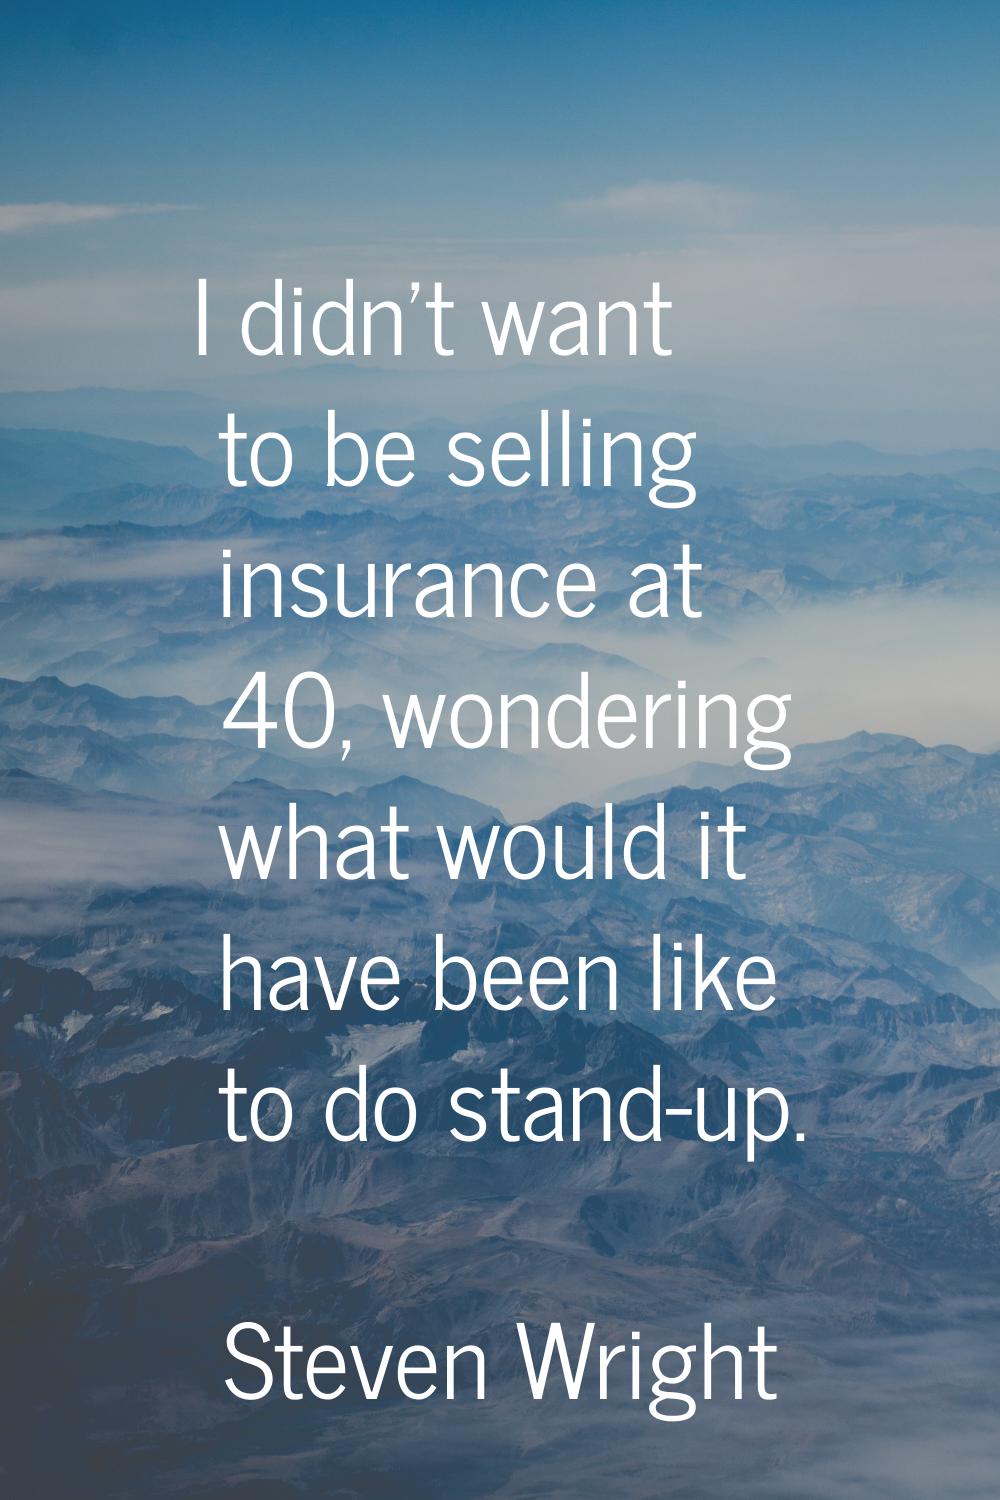 I didn't want to be selling insurance at 40, wondering what would it have been like to do stand-up.